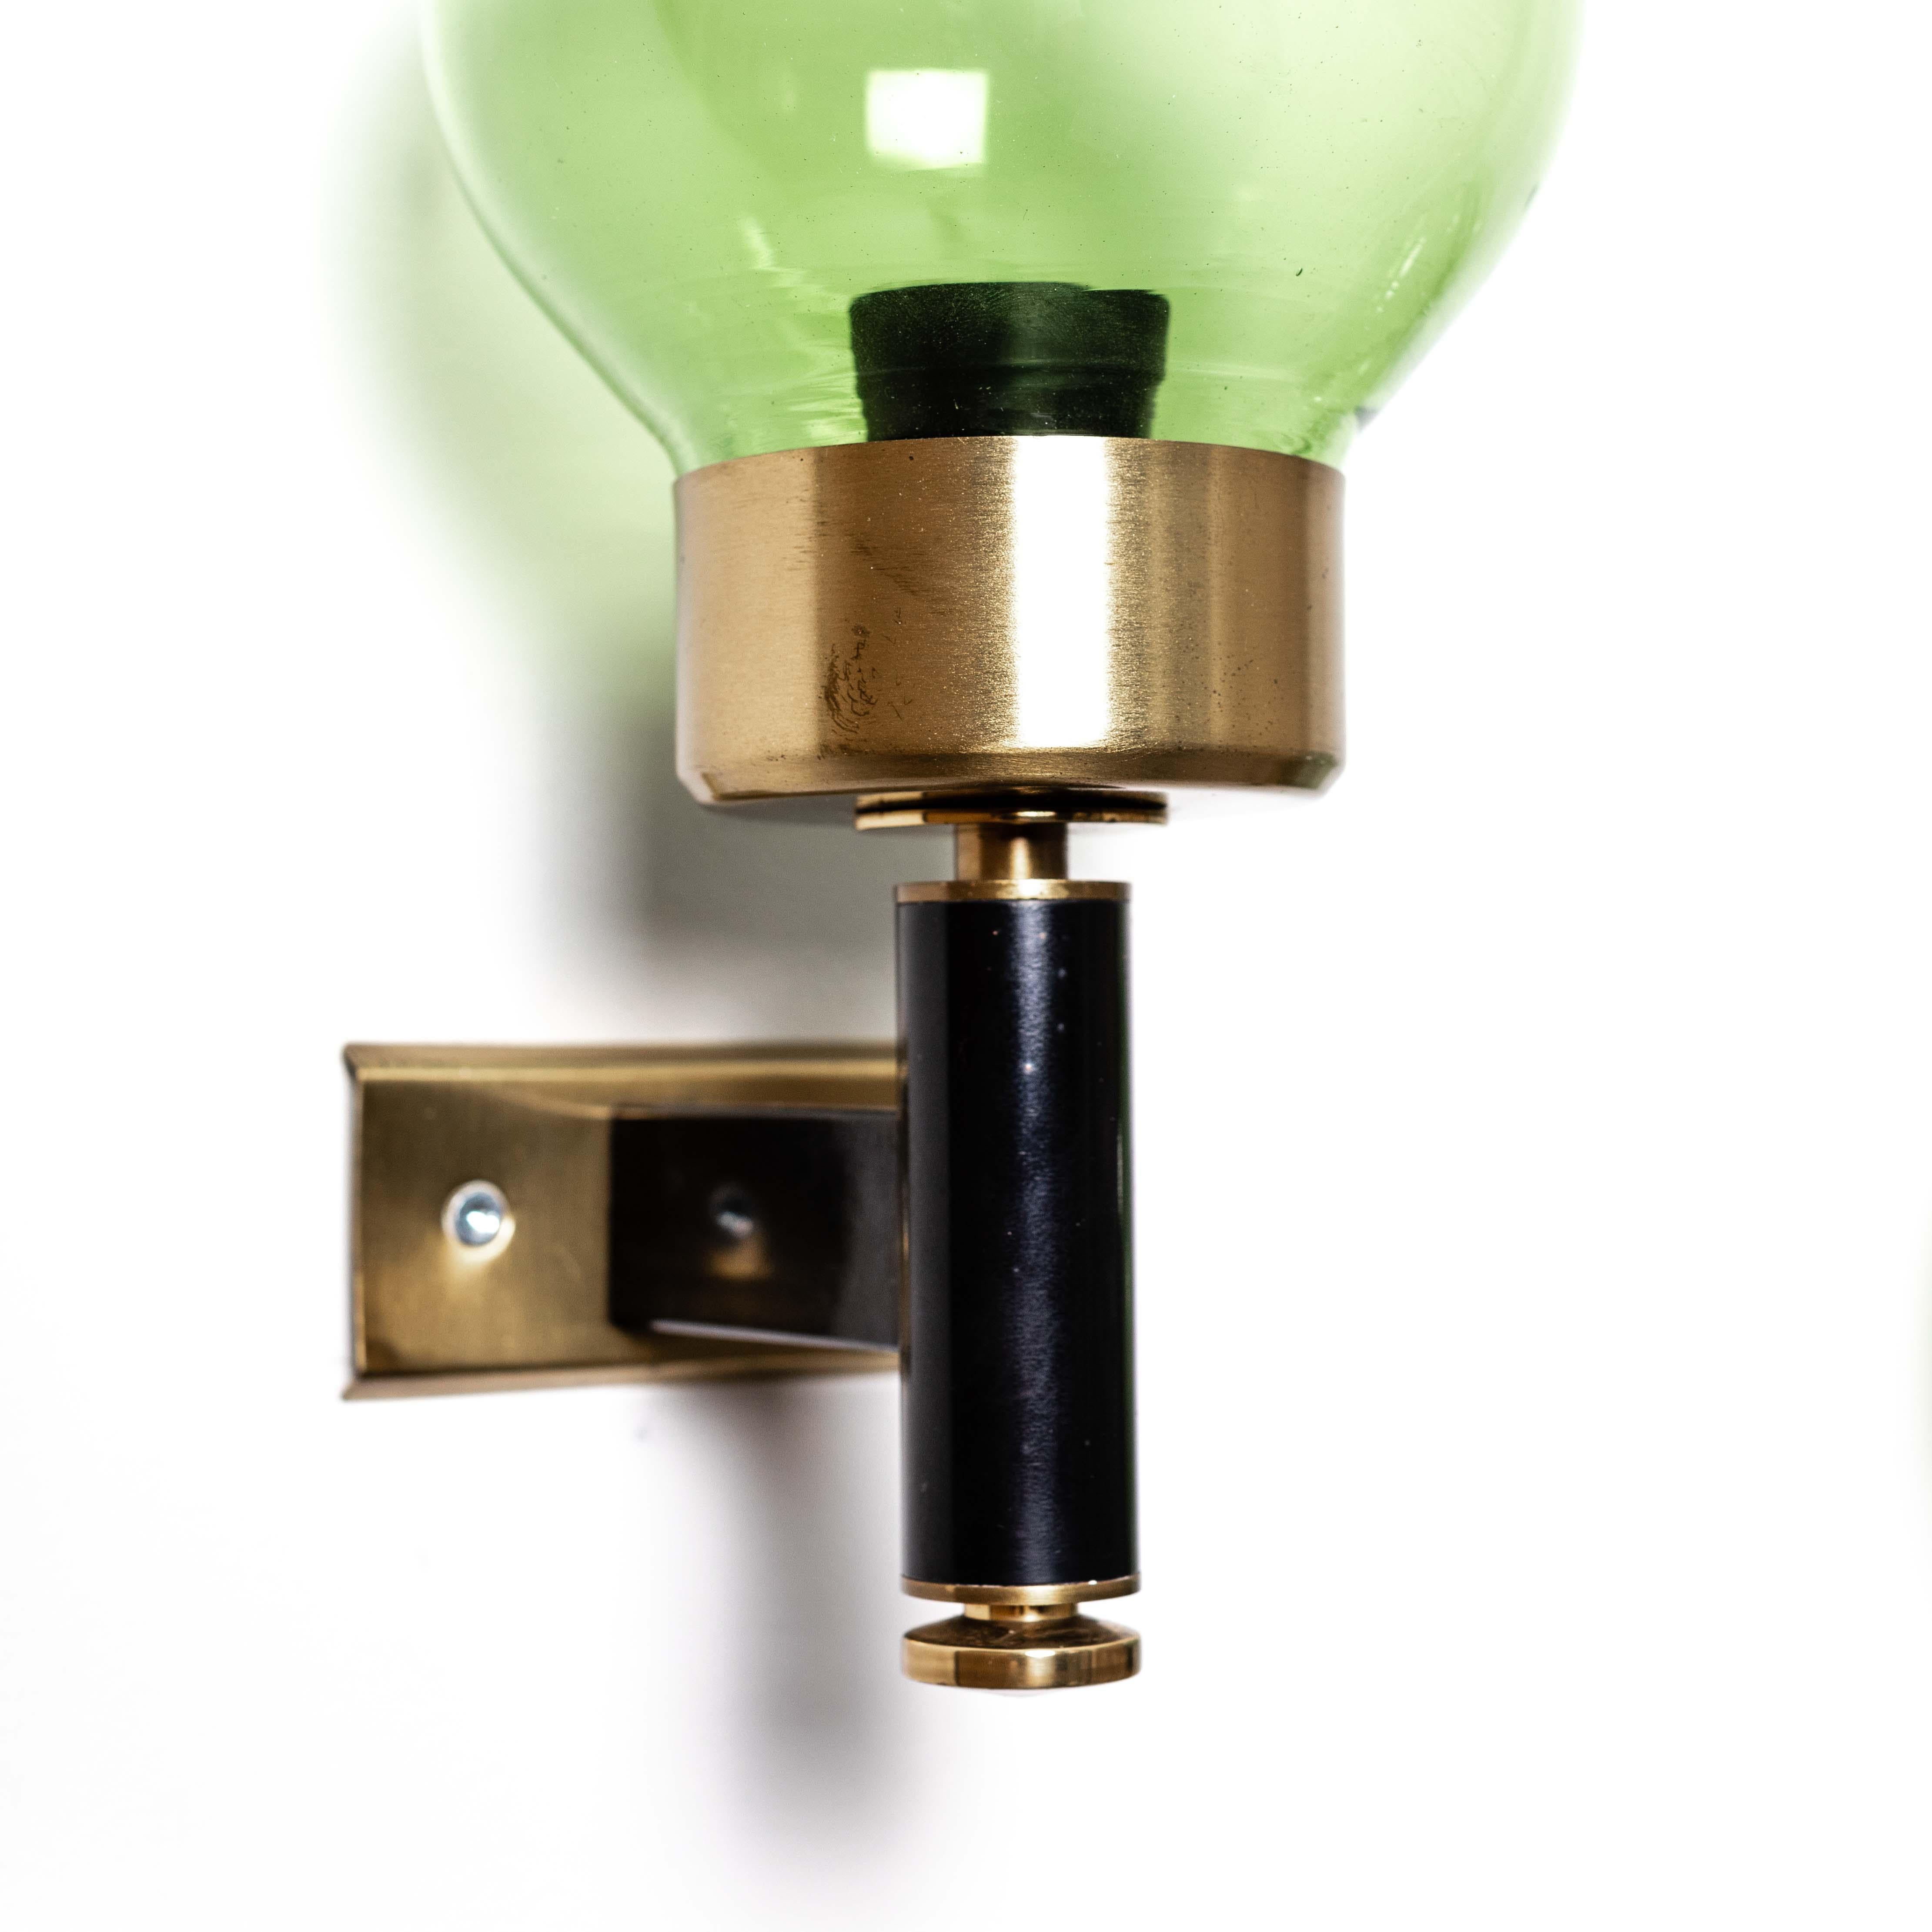 Dating from the 1960-ies, these Italian wall lamps stand out for their clean lines and green glass shades.
The rectilinear central spar is painted black, down with a small heel a slightly tapered brass finish. 
To the top, also with a small spacer